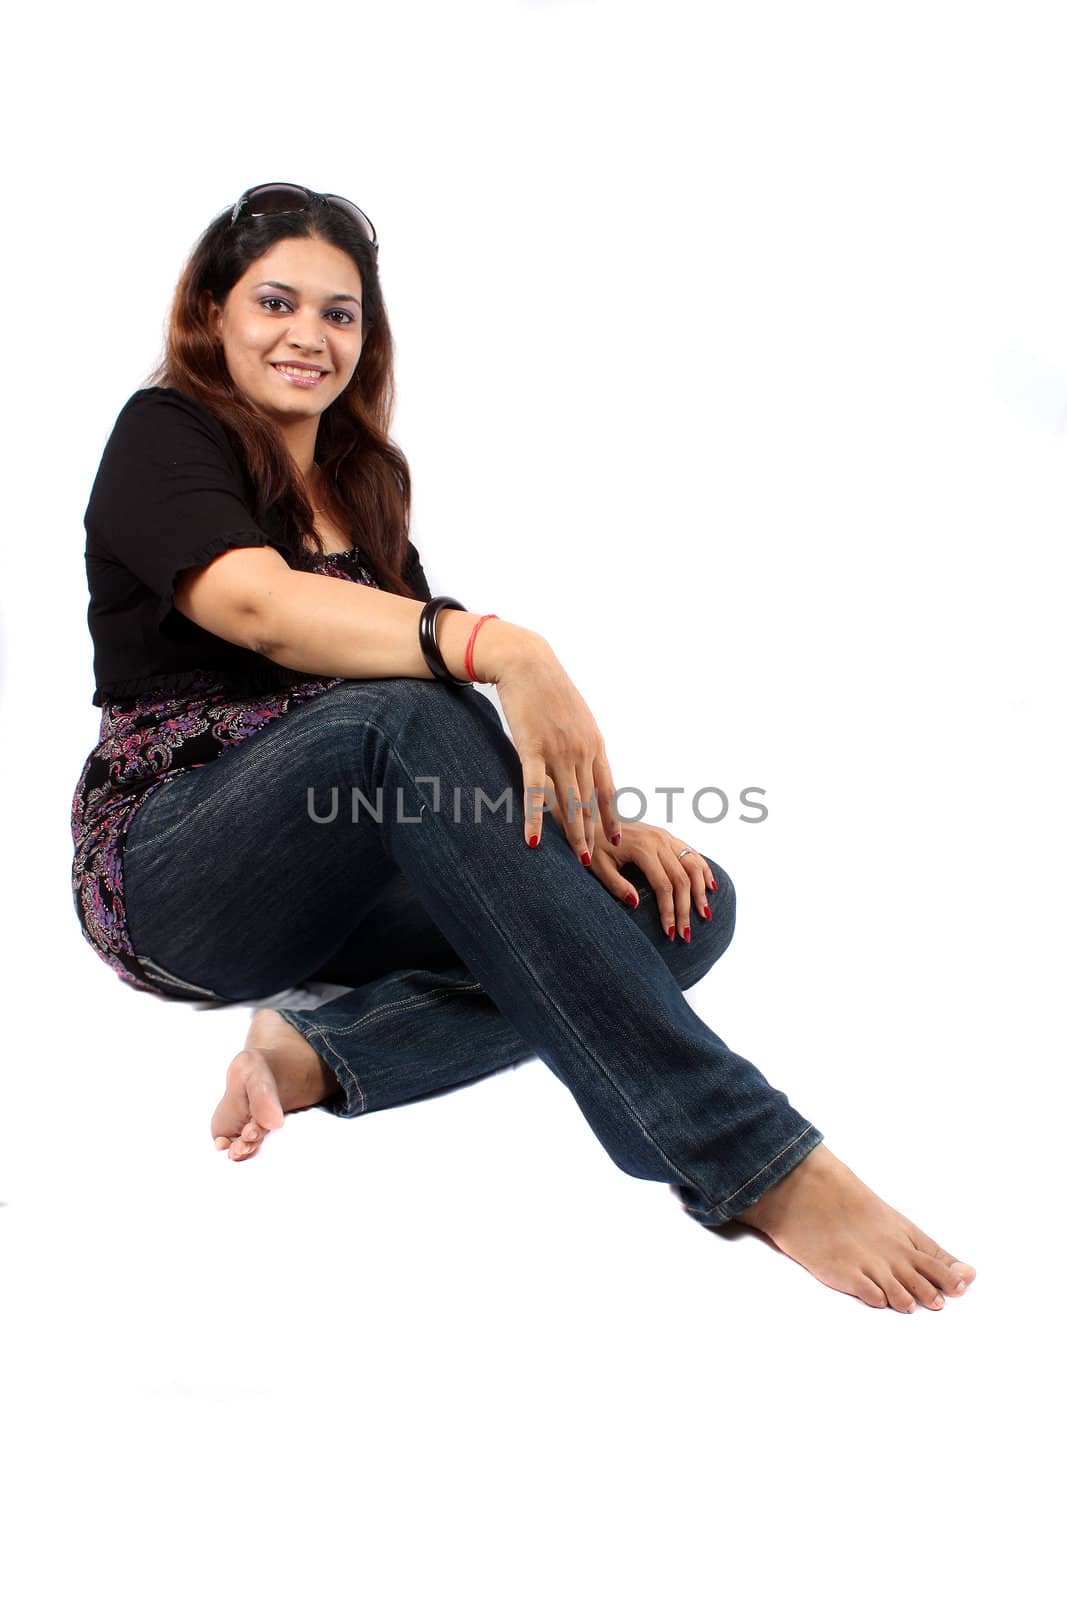 A smart Indian lady sitting on the floor.